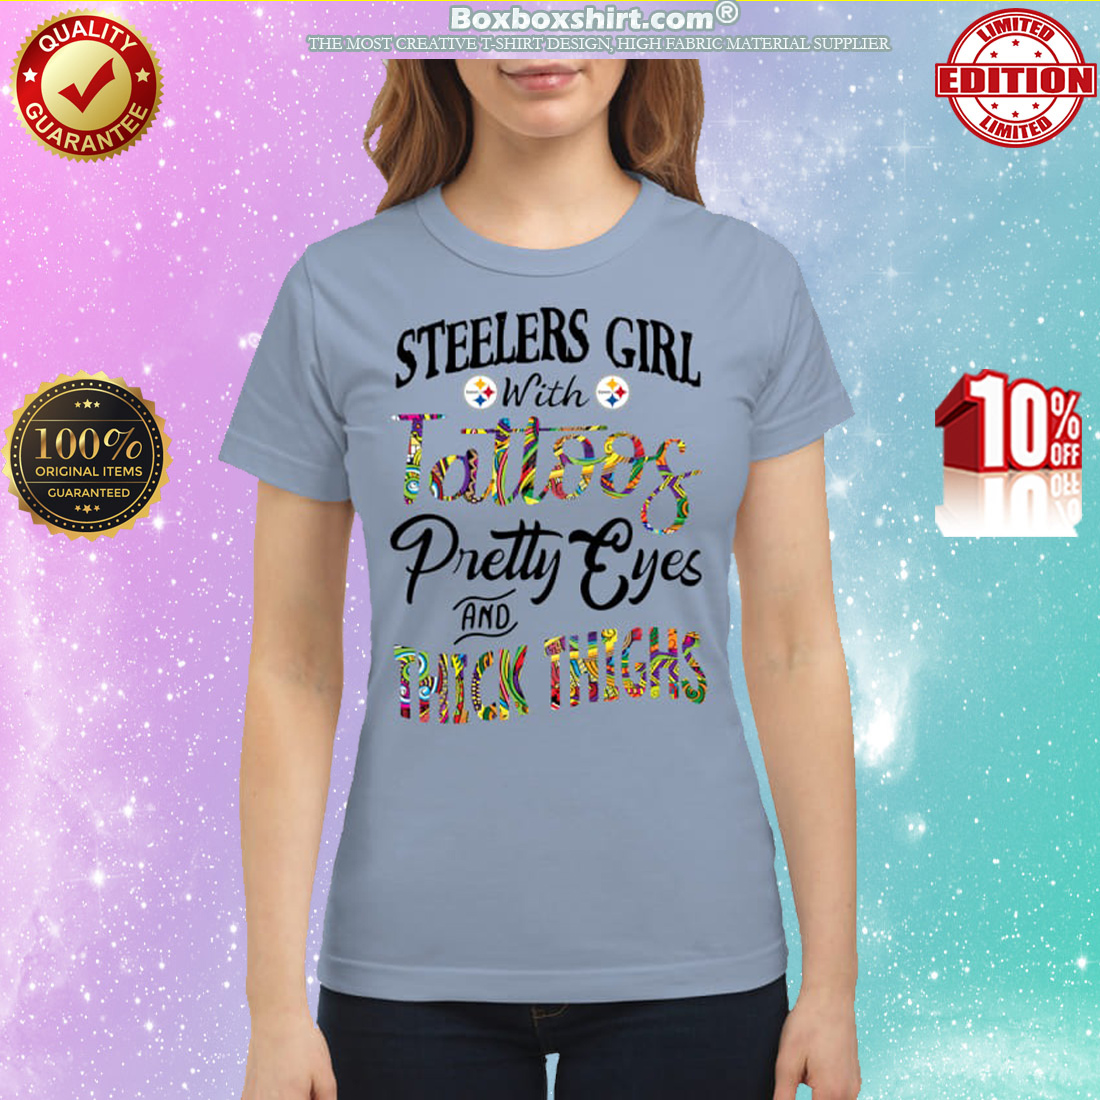 Steelers girl with tattoos pretty eyes and thick thighs classic shirt